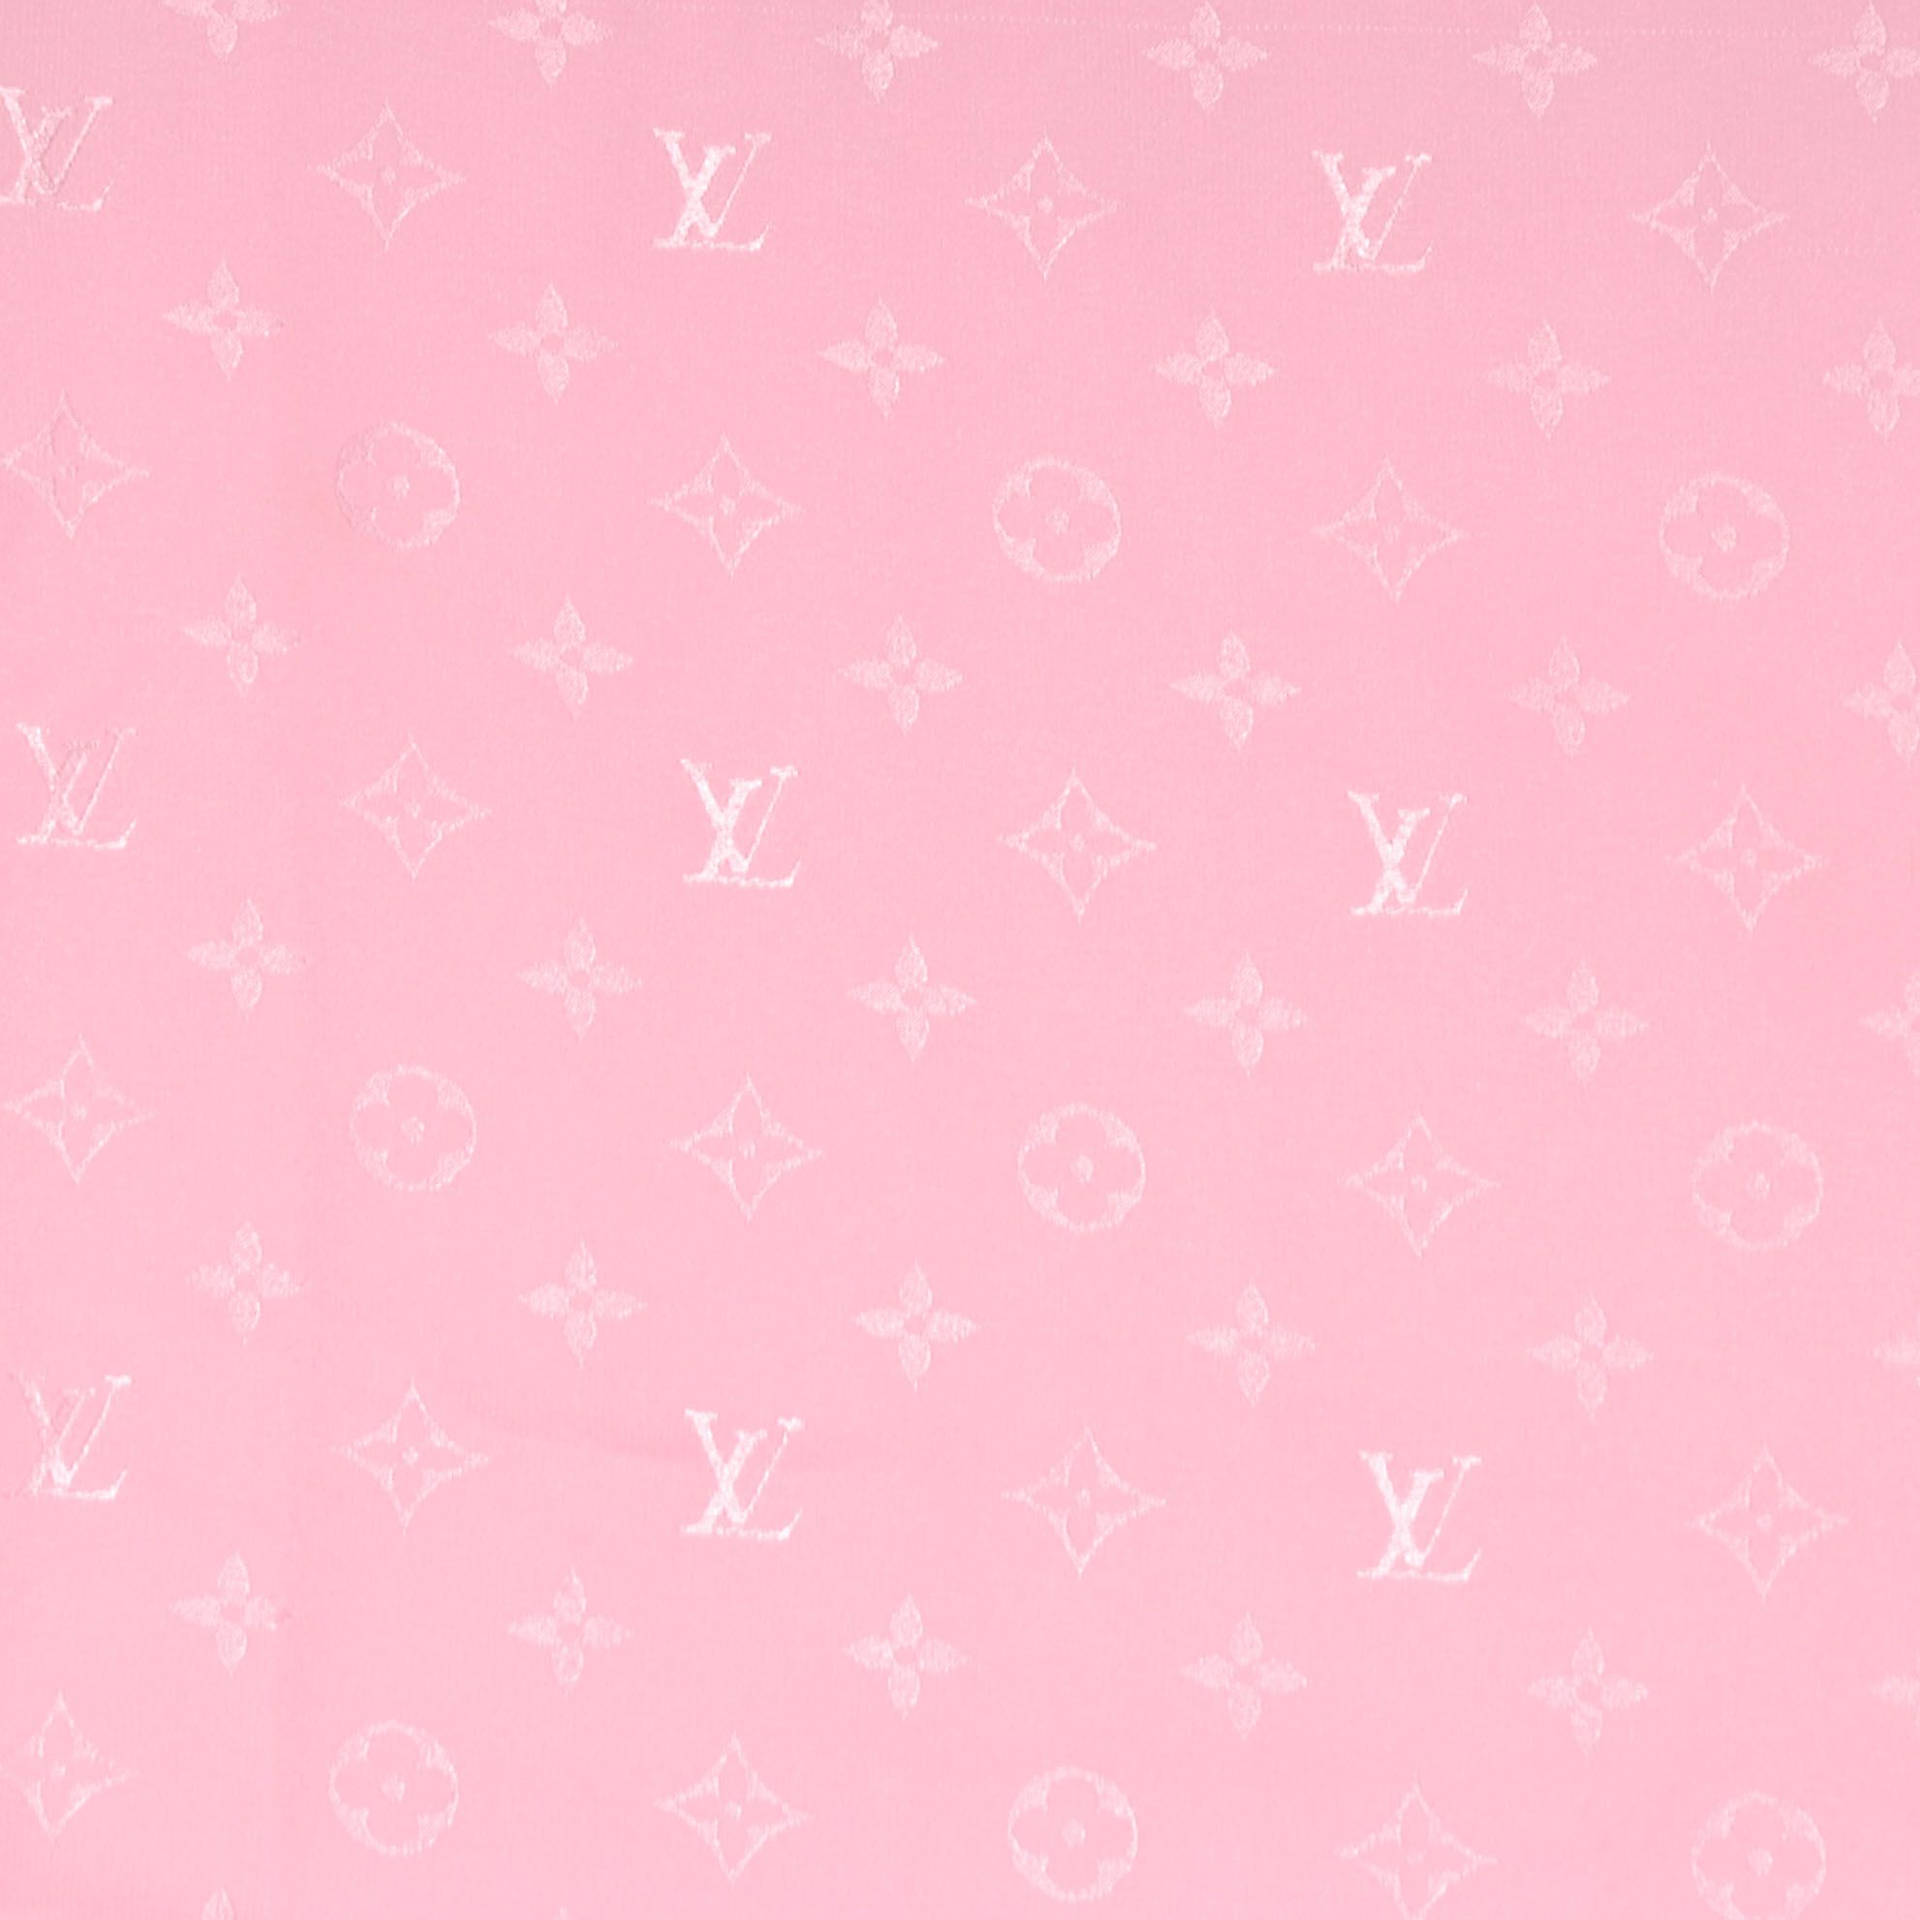 Y2k 1982X1982 Wallpaper and Background Image